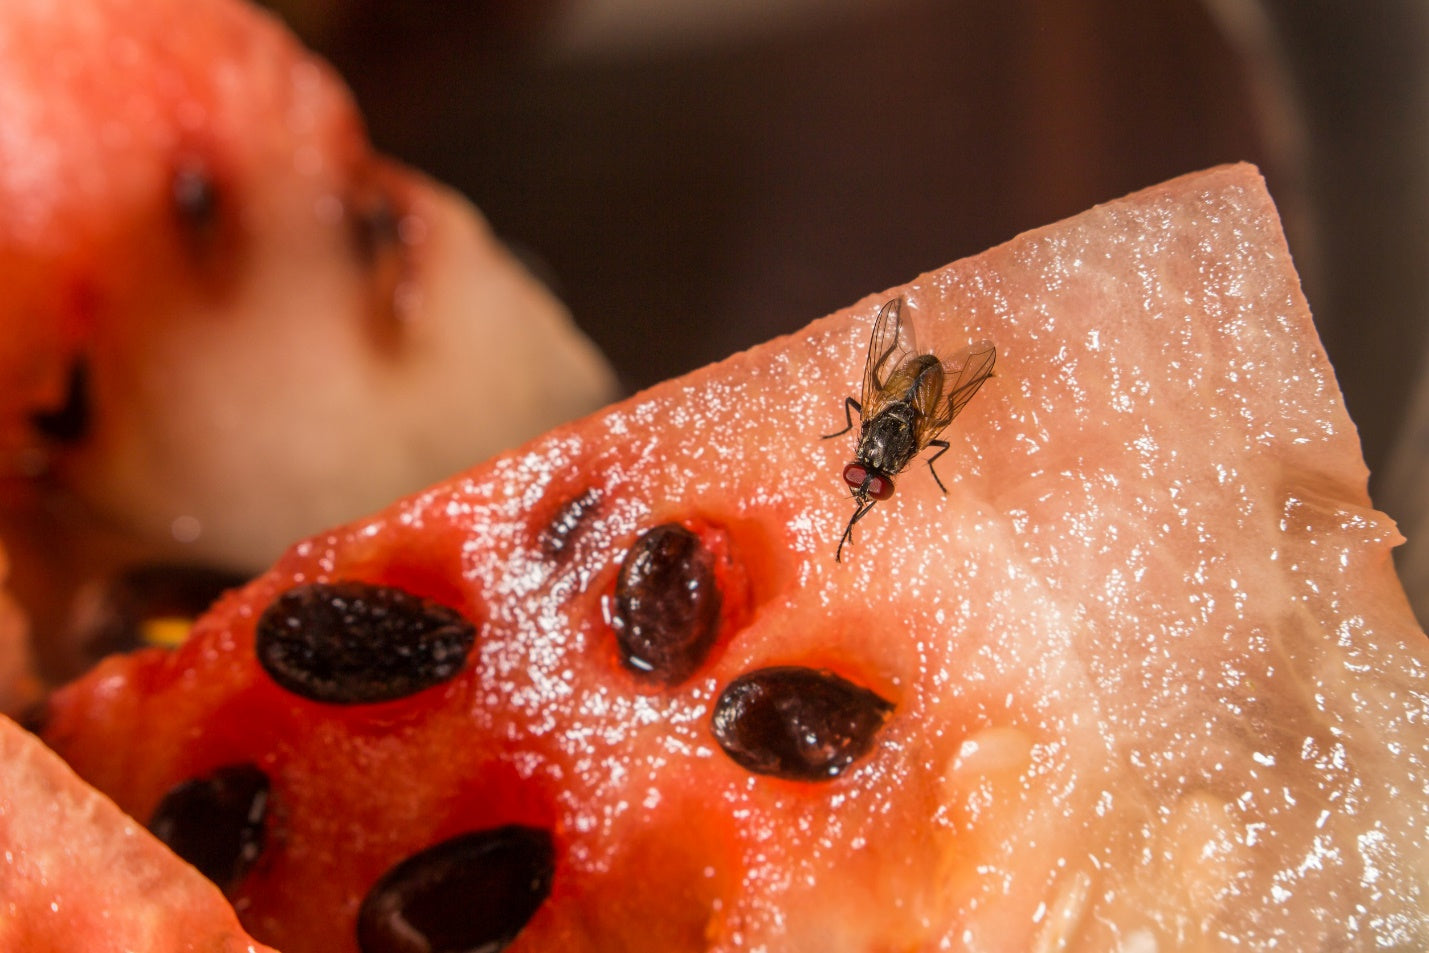 How to get rid of fruit flies when an infestation happens in your home